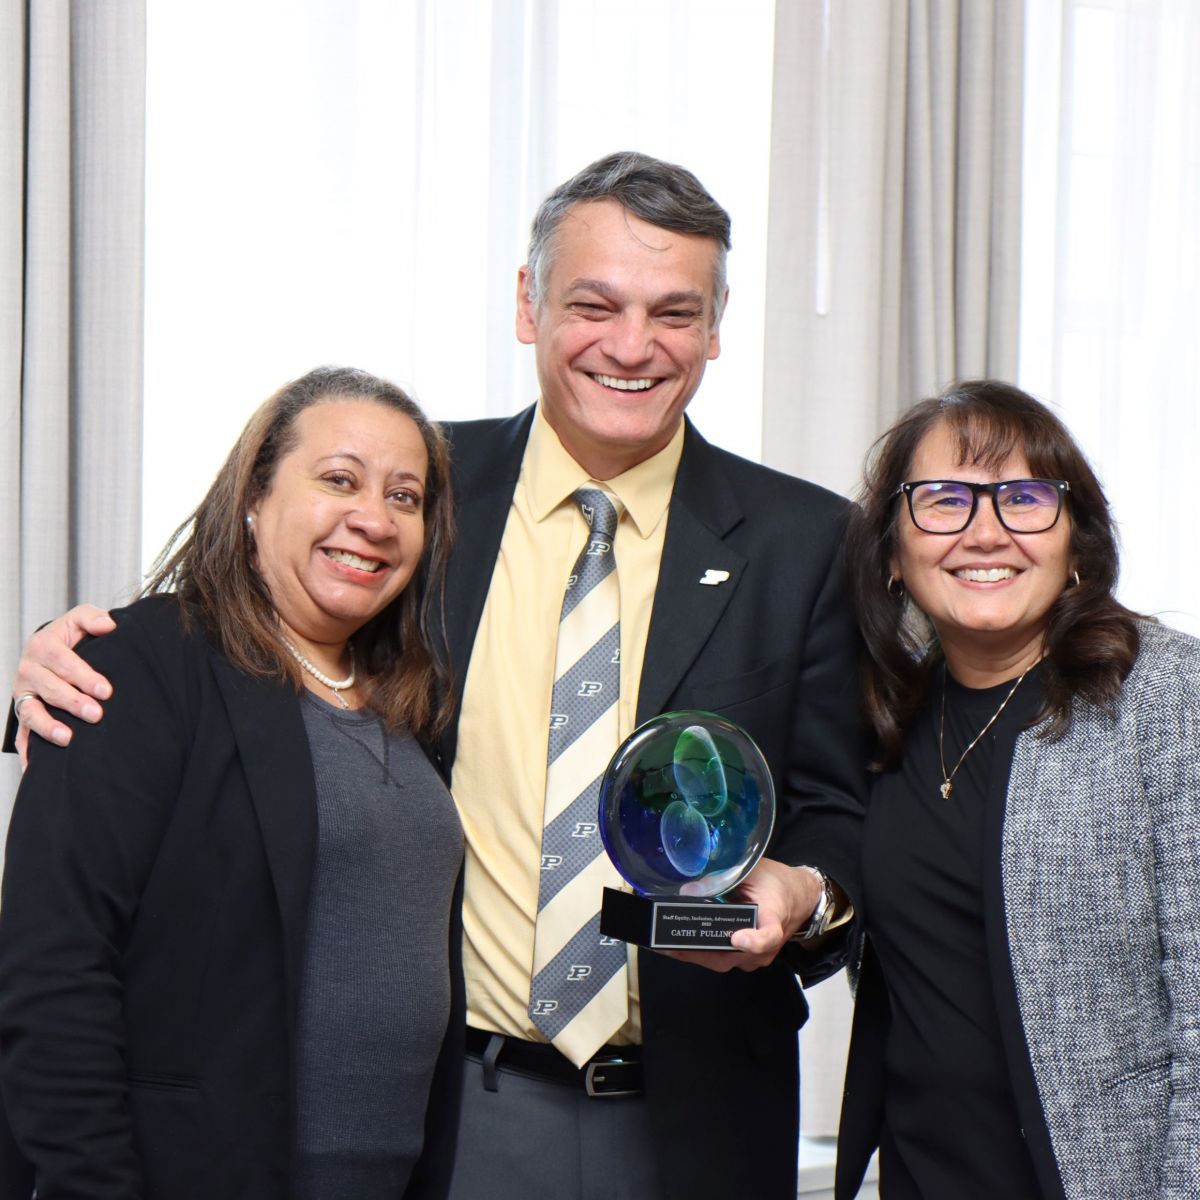 Cathy Pullings (left), the winner of multiple staff awards, is pictured along with Polytechnic's dean and Antonia Munguia, director of the recruitment, retention and diversity office.  (Purdue University photo/John O'Malley)